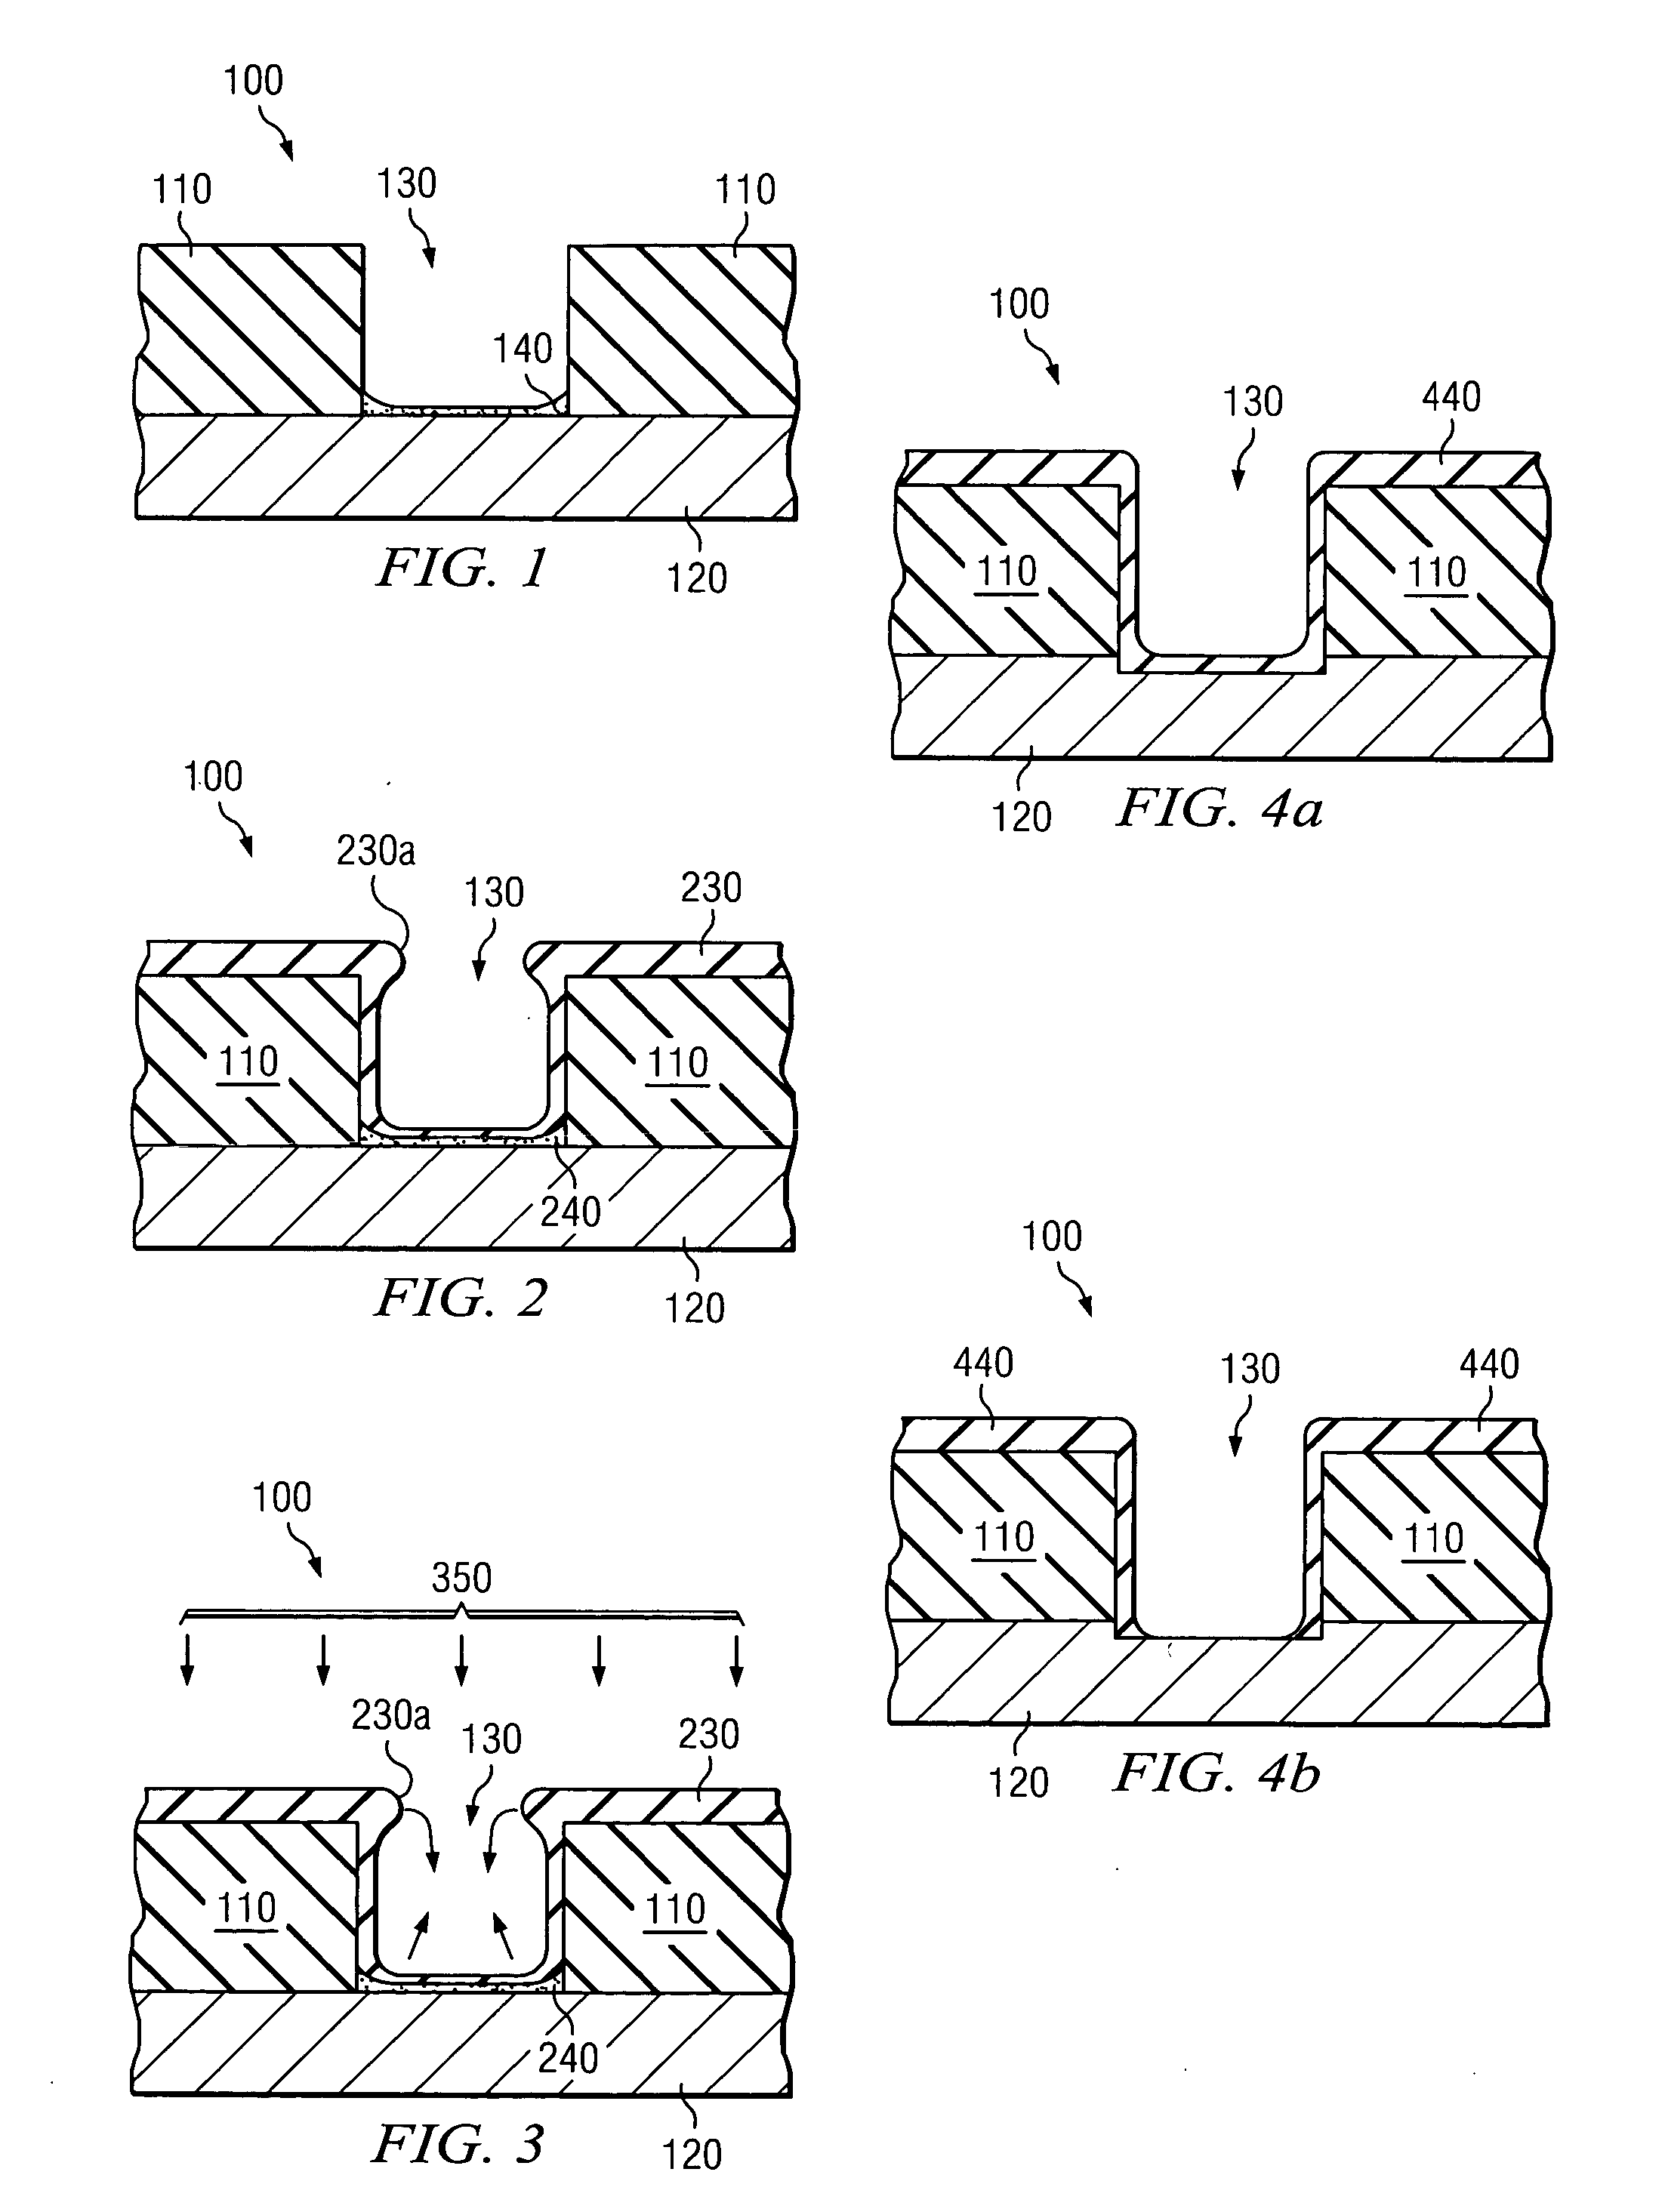 Contact resistance reduction by new barrier stack process